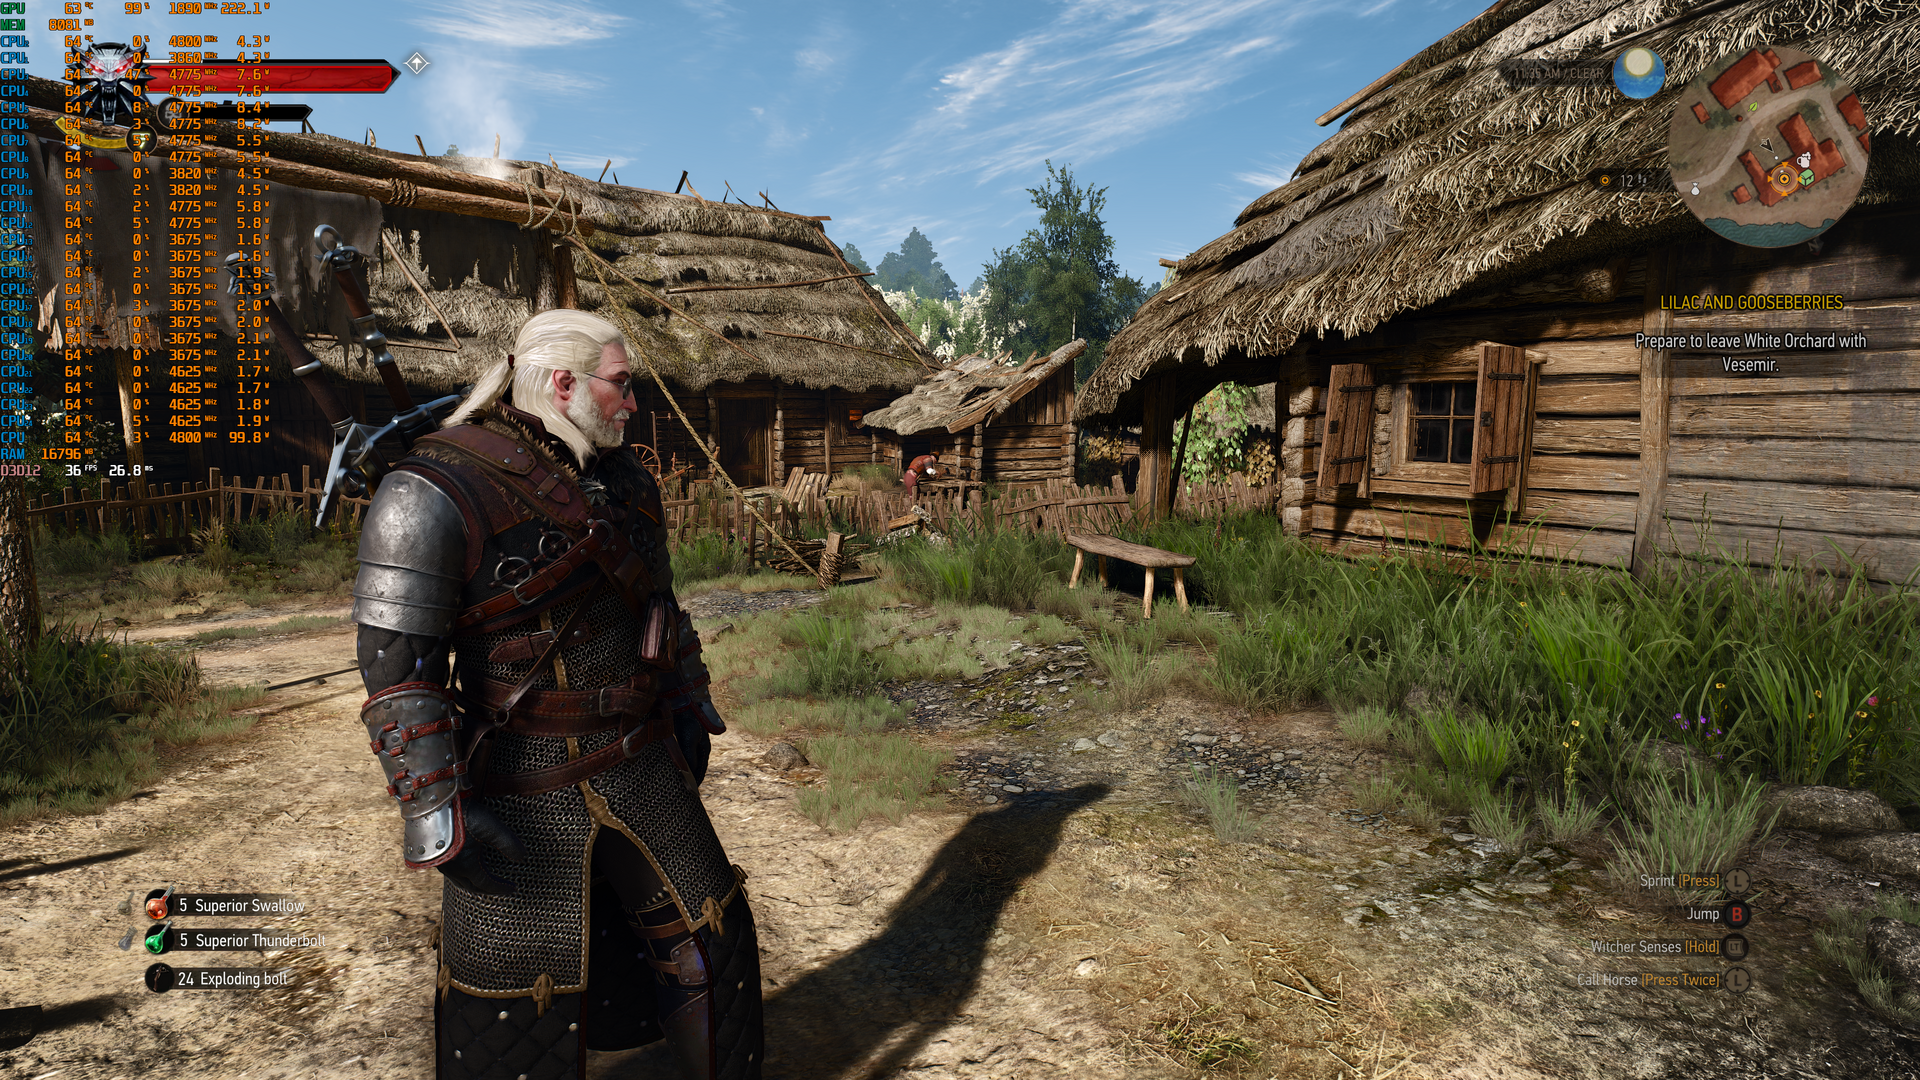 rsz_2the_witcher_3_screenshot_20221224_-_09235095.png